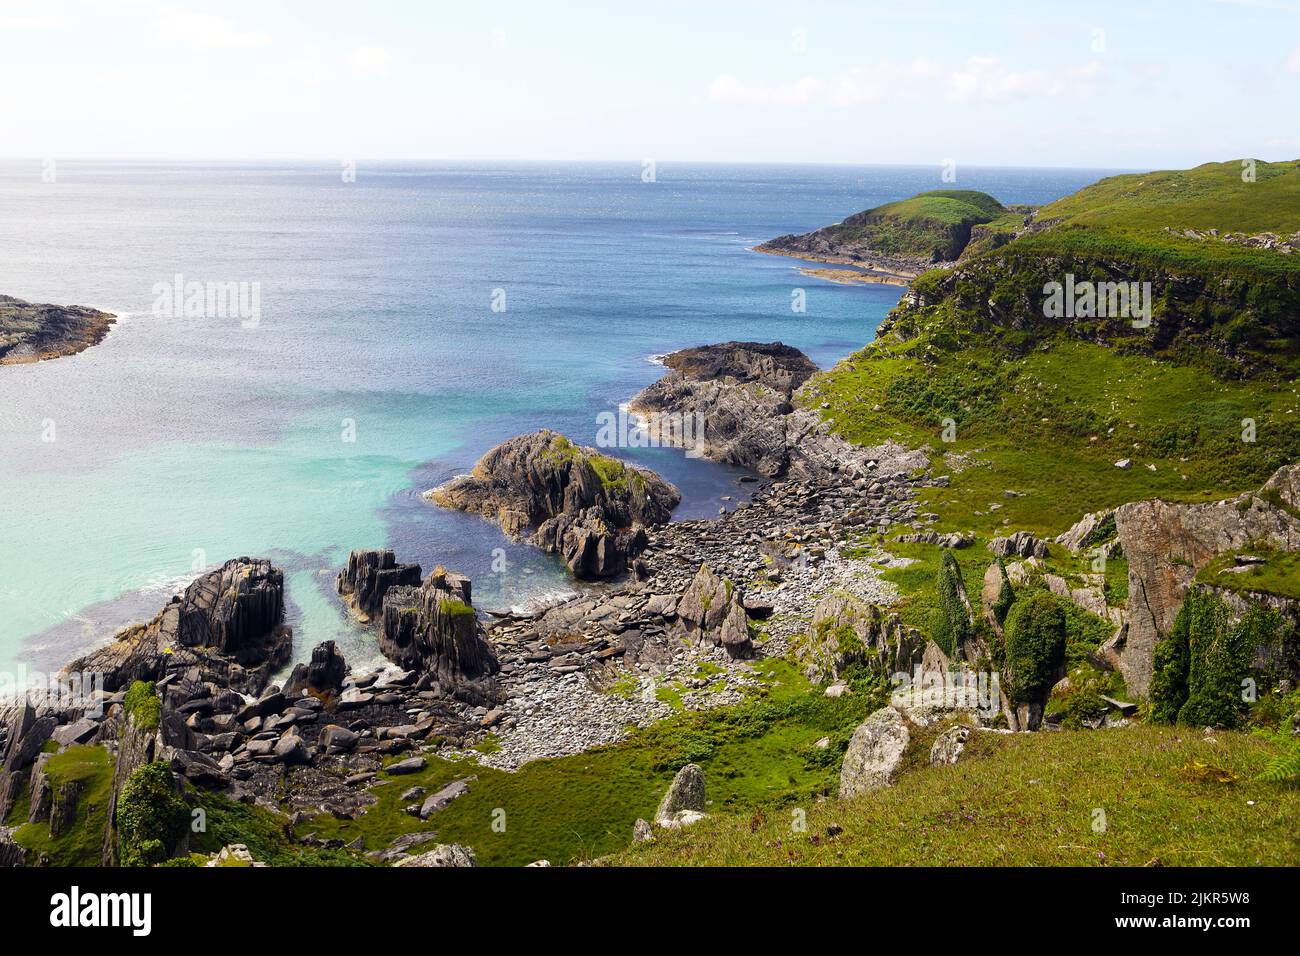 The rugged and wild coastline of the Ross of Mull part of the Isle of Mull in Scotland's Inner Hebrides Stock Photo